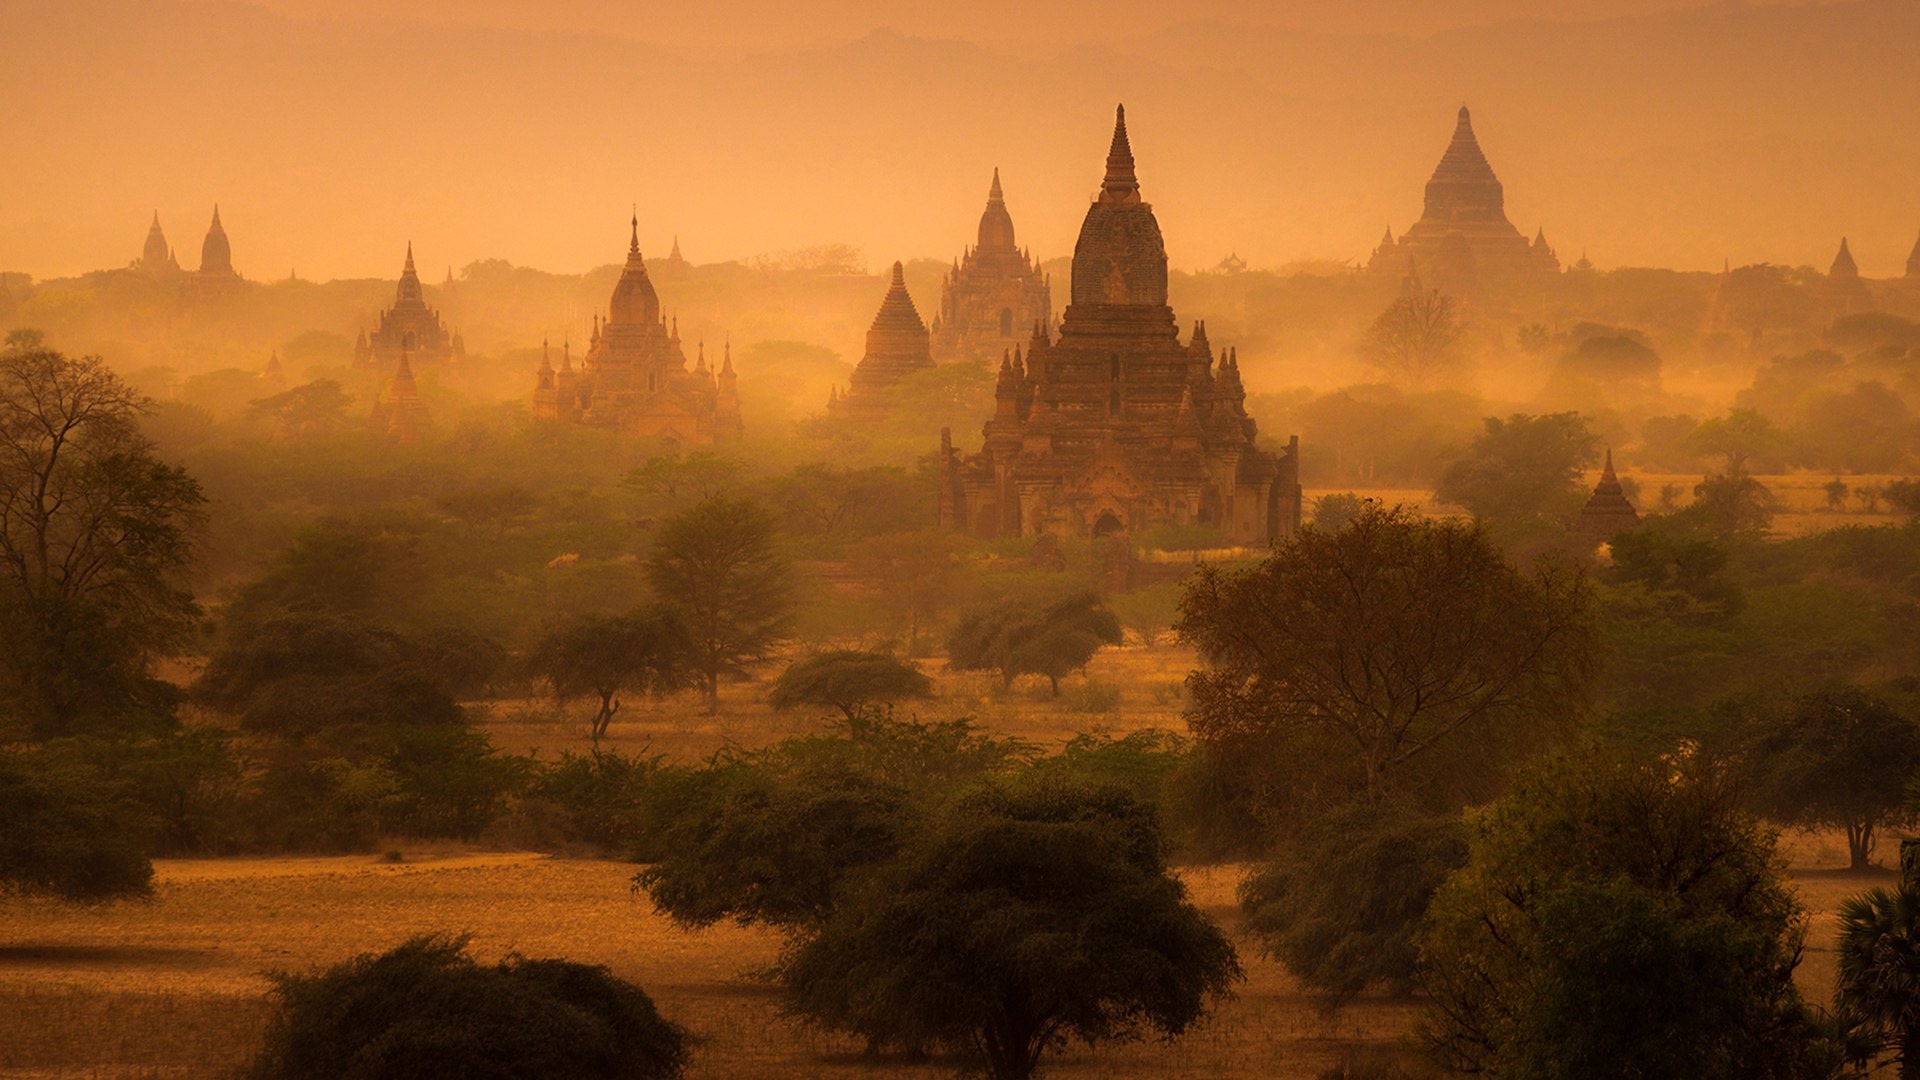 The Temples of Bagan wallpaper - backiee